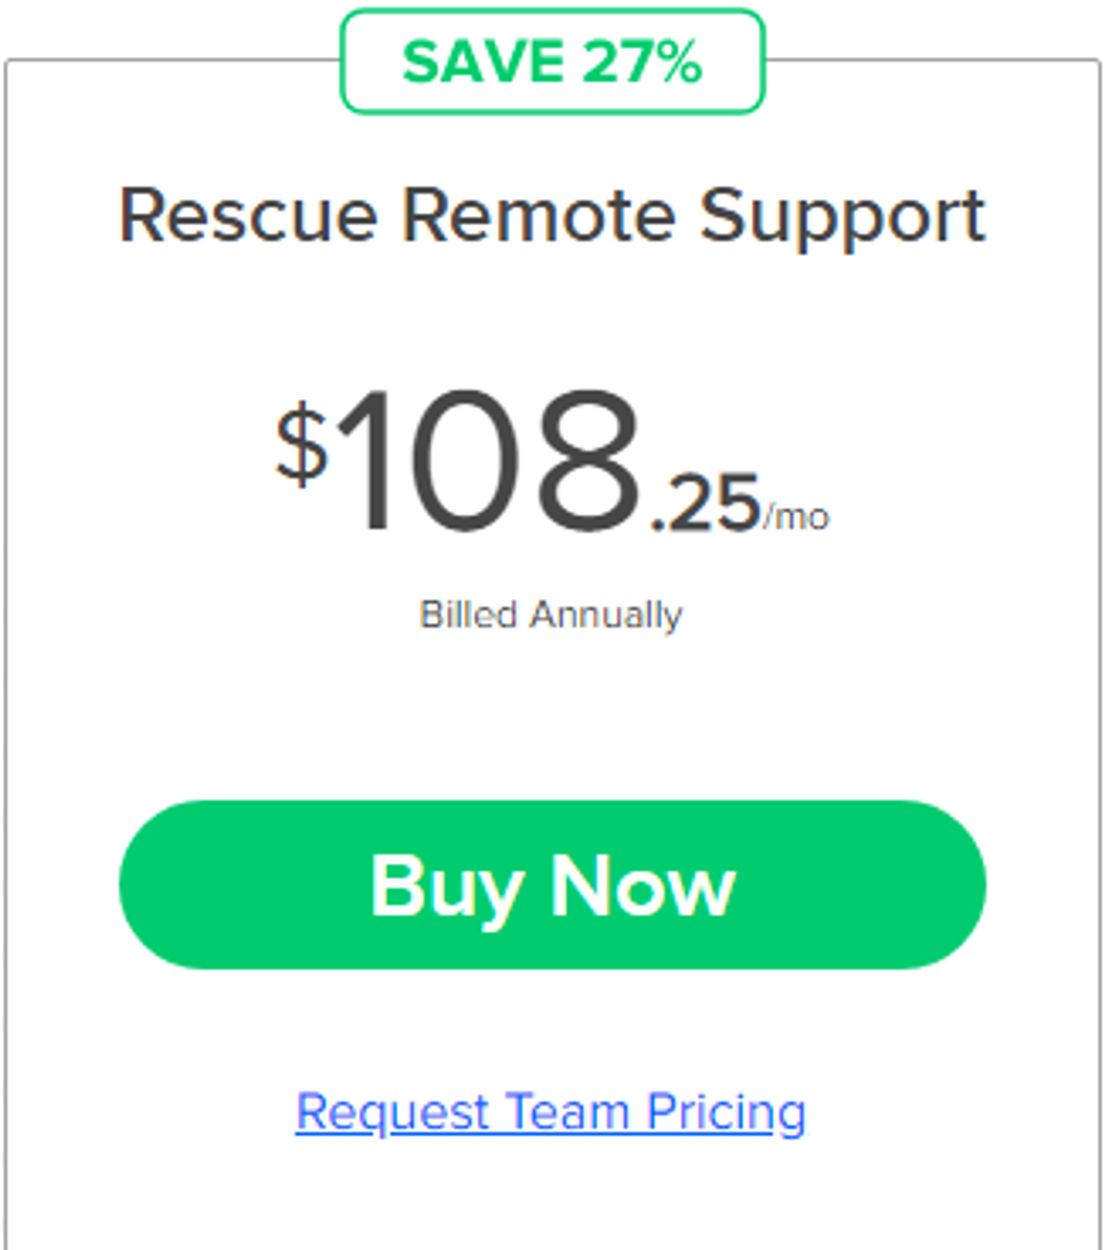 LogMeIn Rescue Pricing